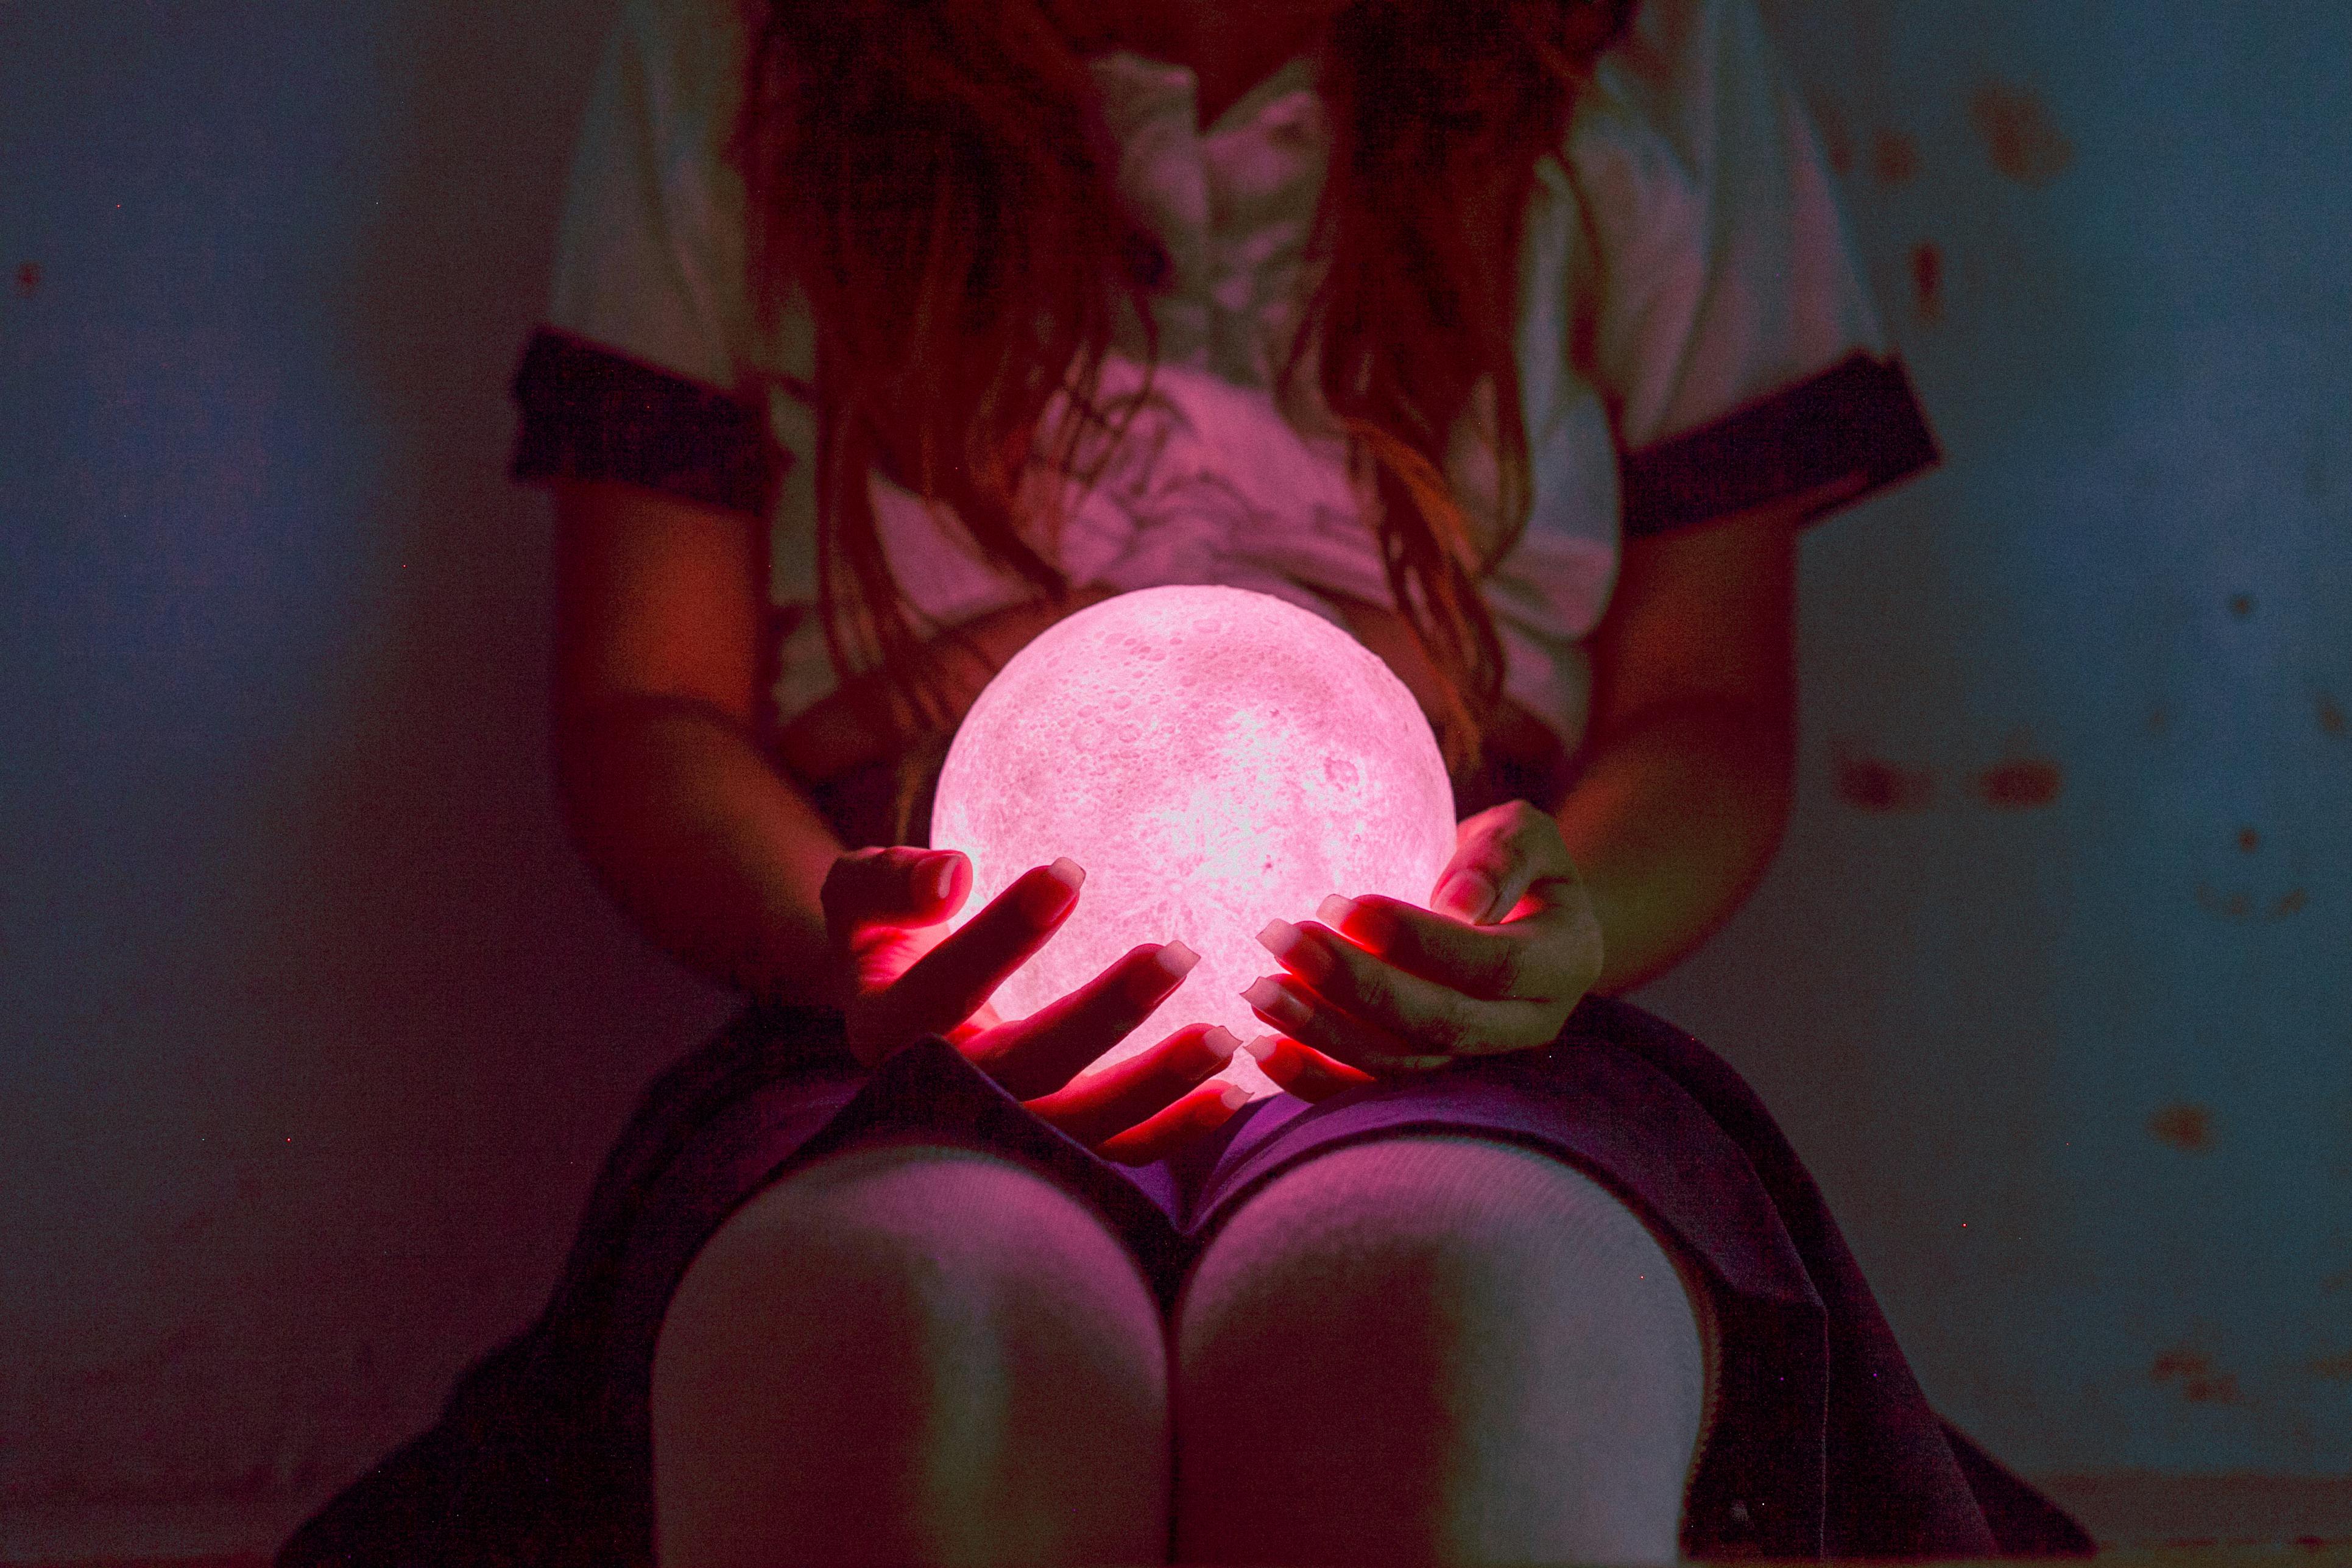 person holding ball night lamp while sitting